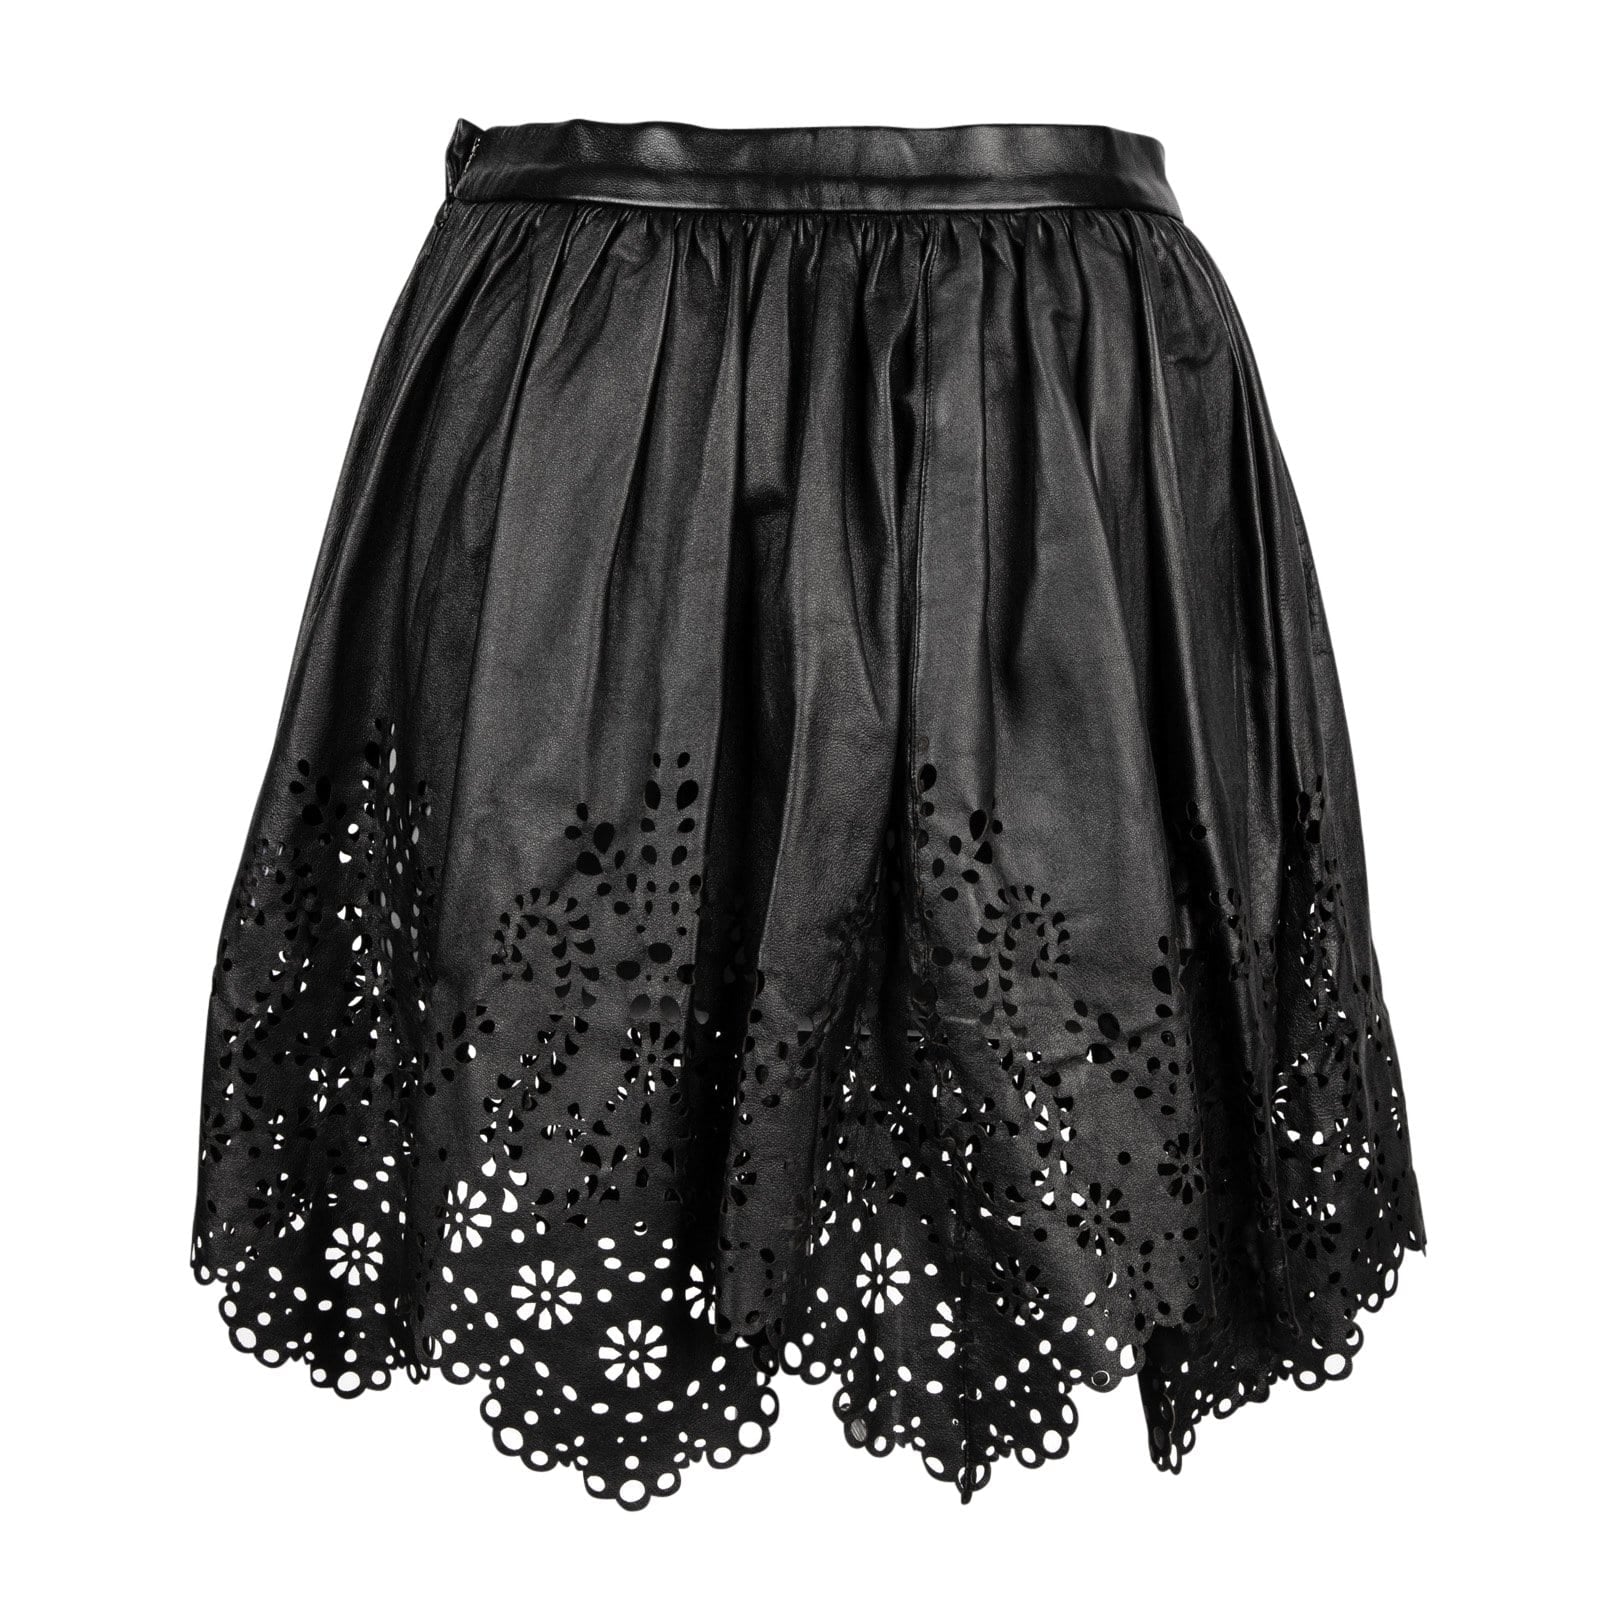 Chloe Skirt Leather Opening Ceremony Laser Cut S New - mightychic